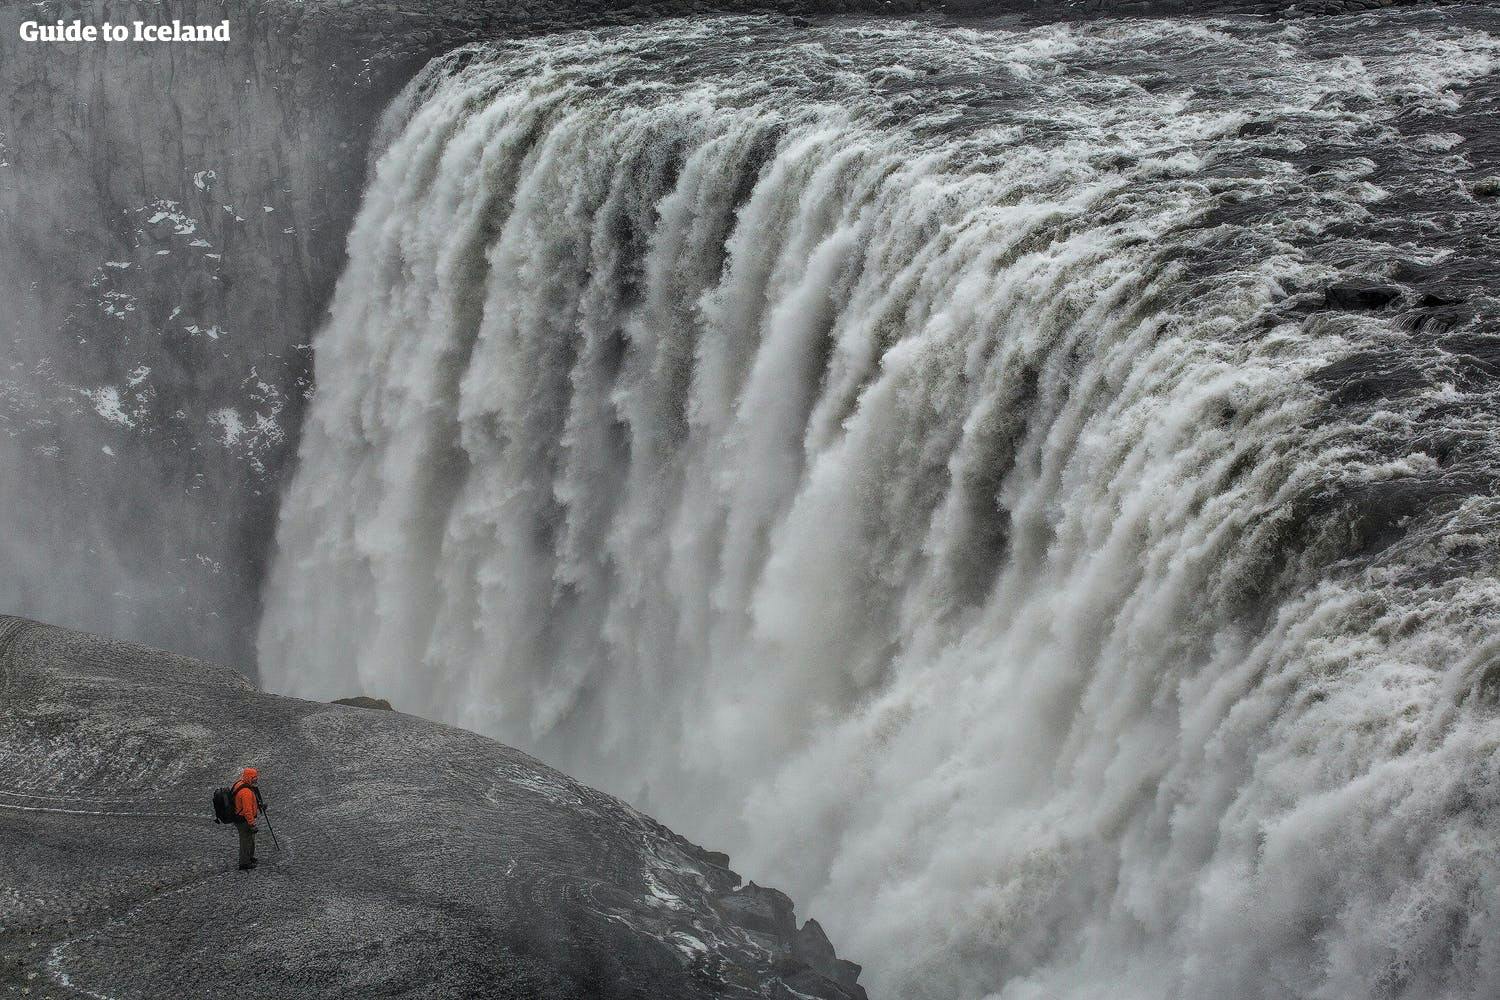 Europe's most powerful waterfall, Dettifoss, in North Iceland.